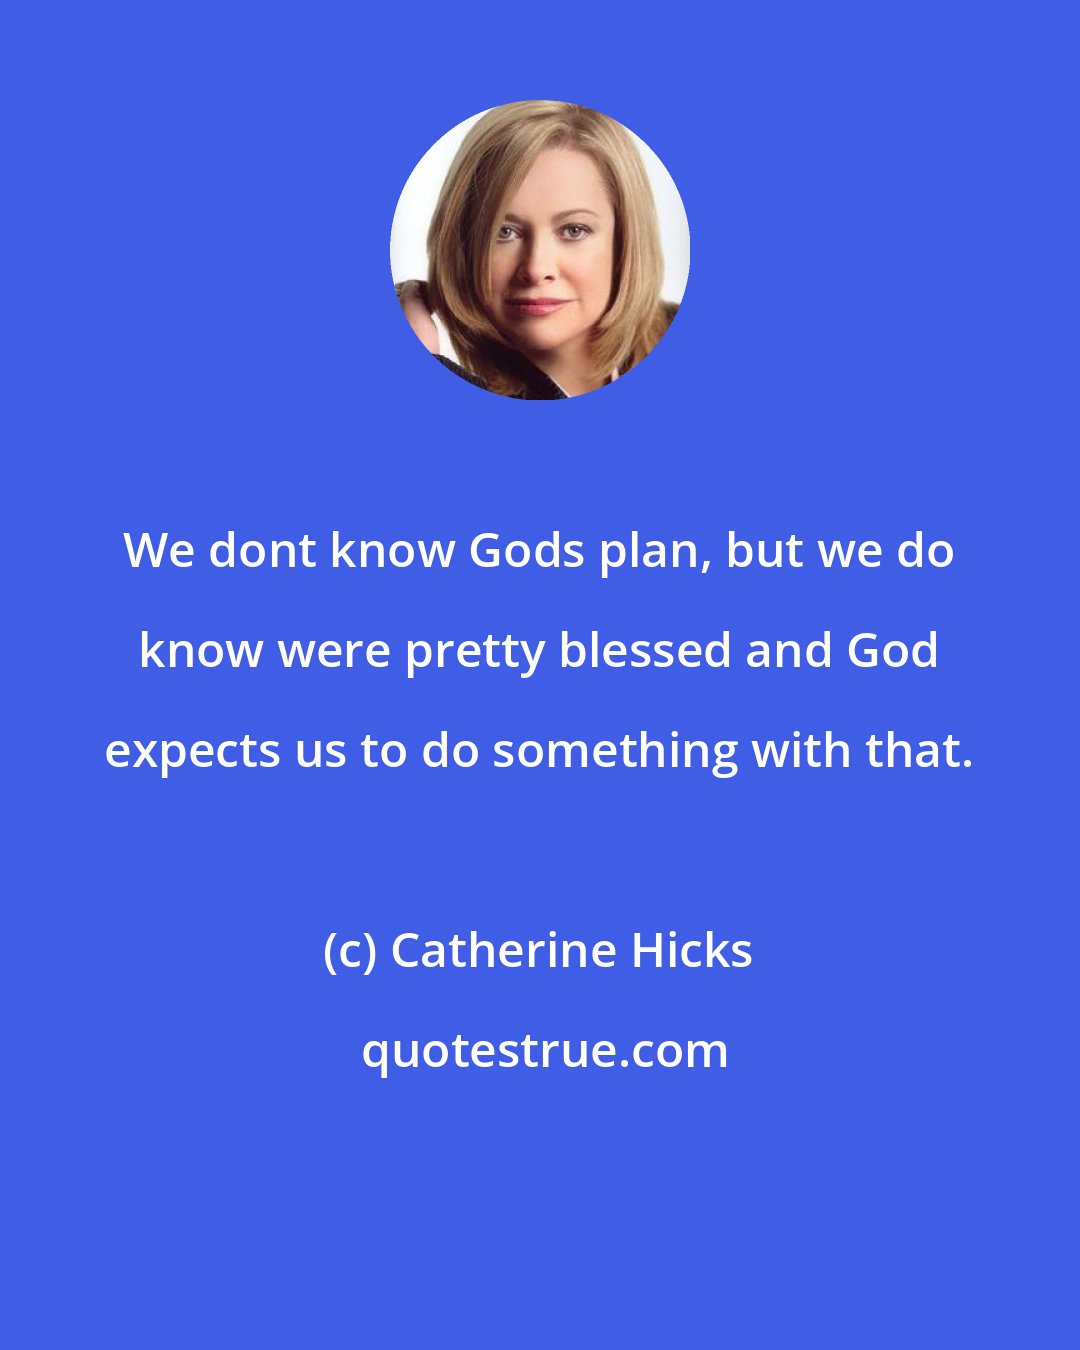 Catherine Hicks: We dont know Gods plan, but we do know were pretty blessed and God expects us to do something with that.